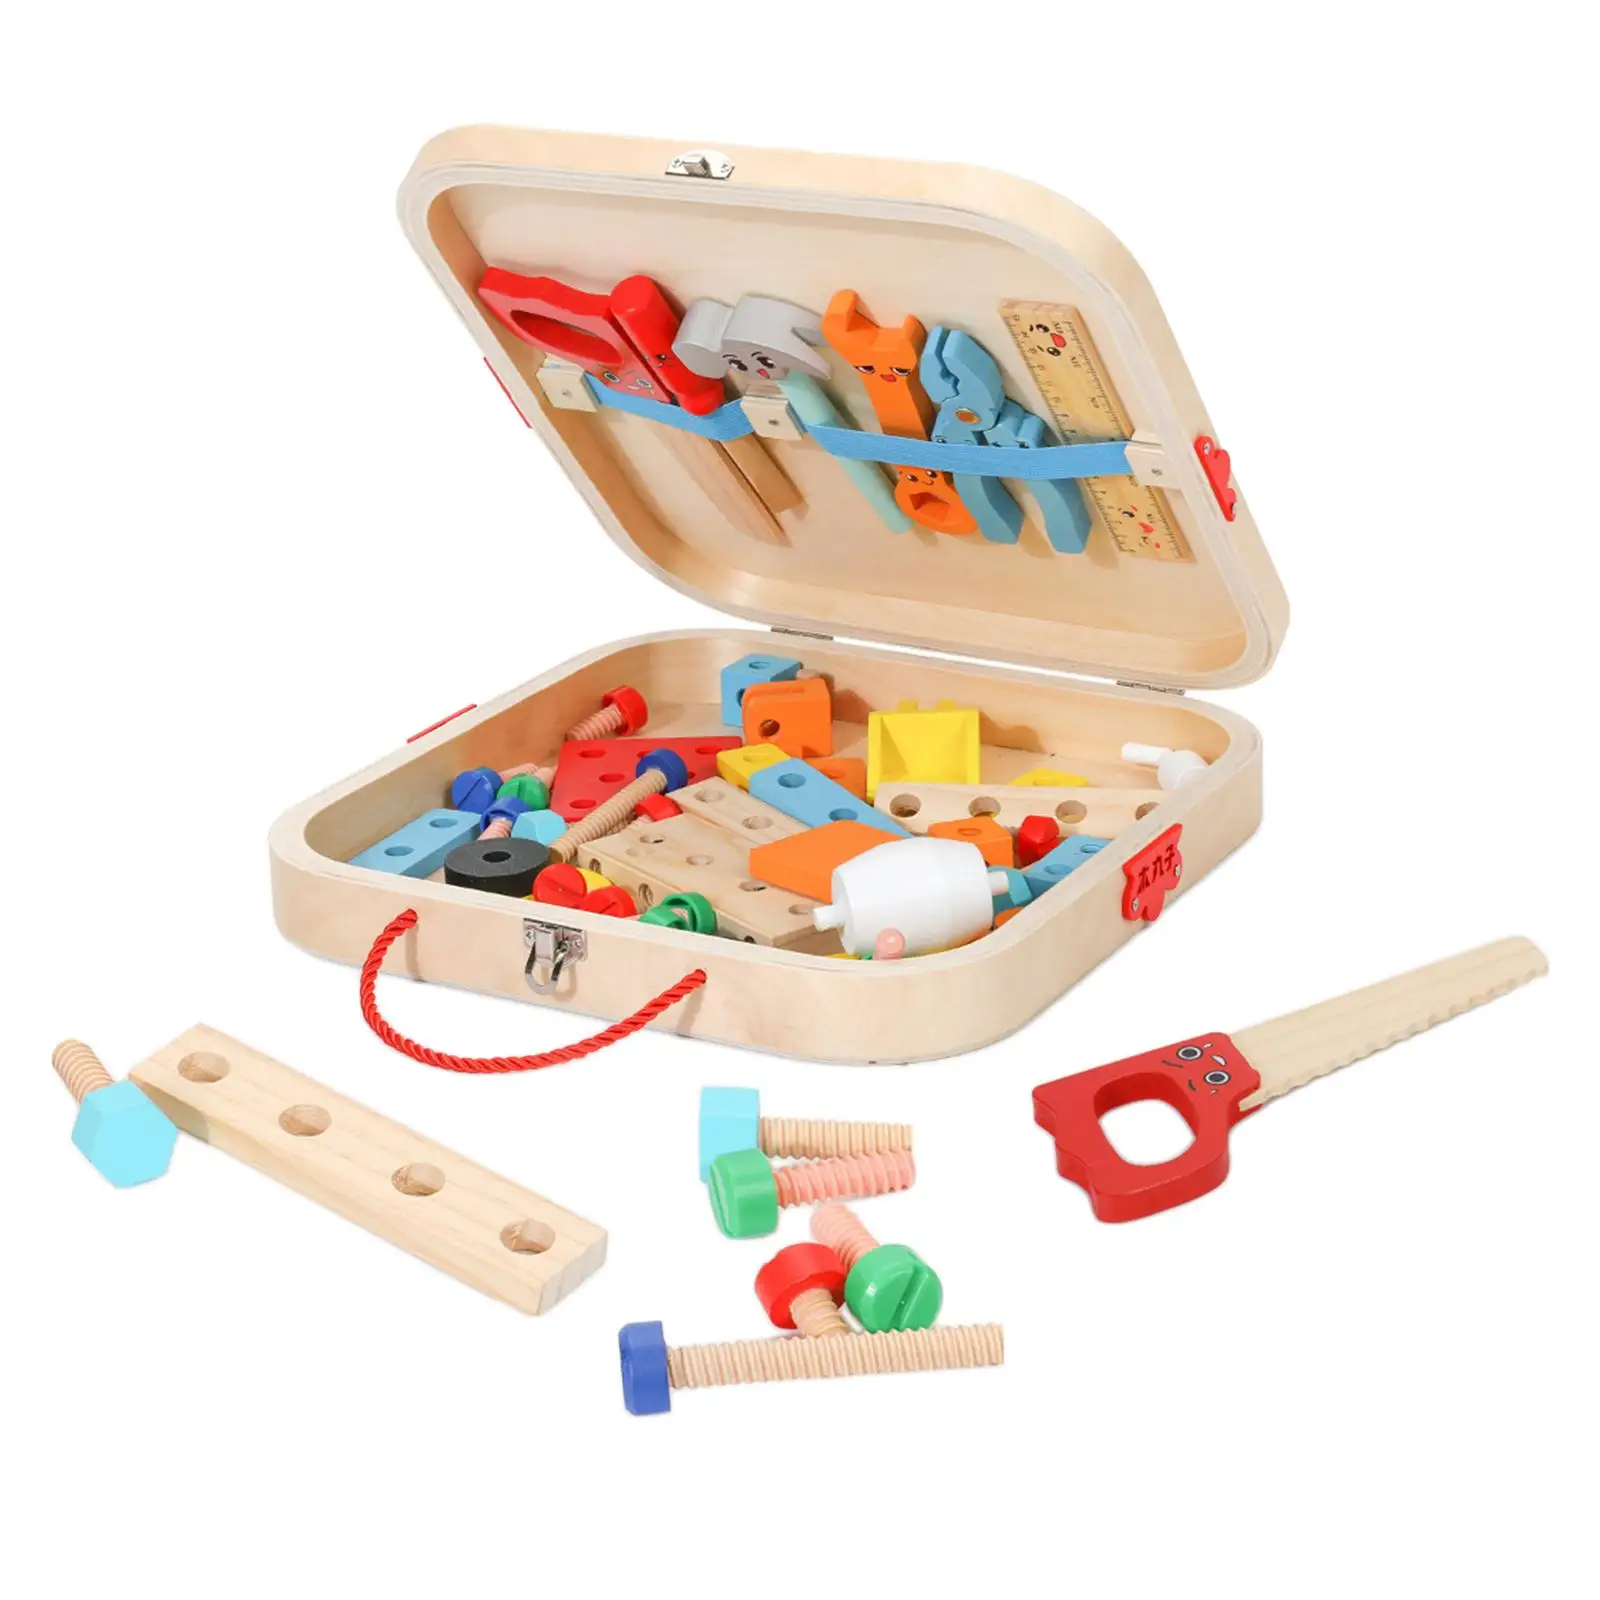 Wooden Kid Tool Set for Toddlers Smooth Wooden Toy Tool Box for DIY Home Bedroom Living Room and 3 4 5 6 Year Old Boys and Girls